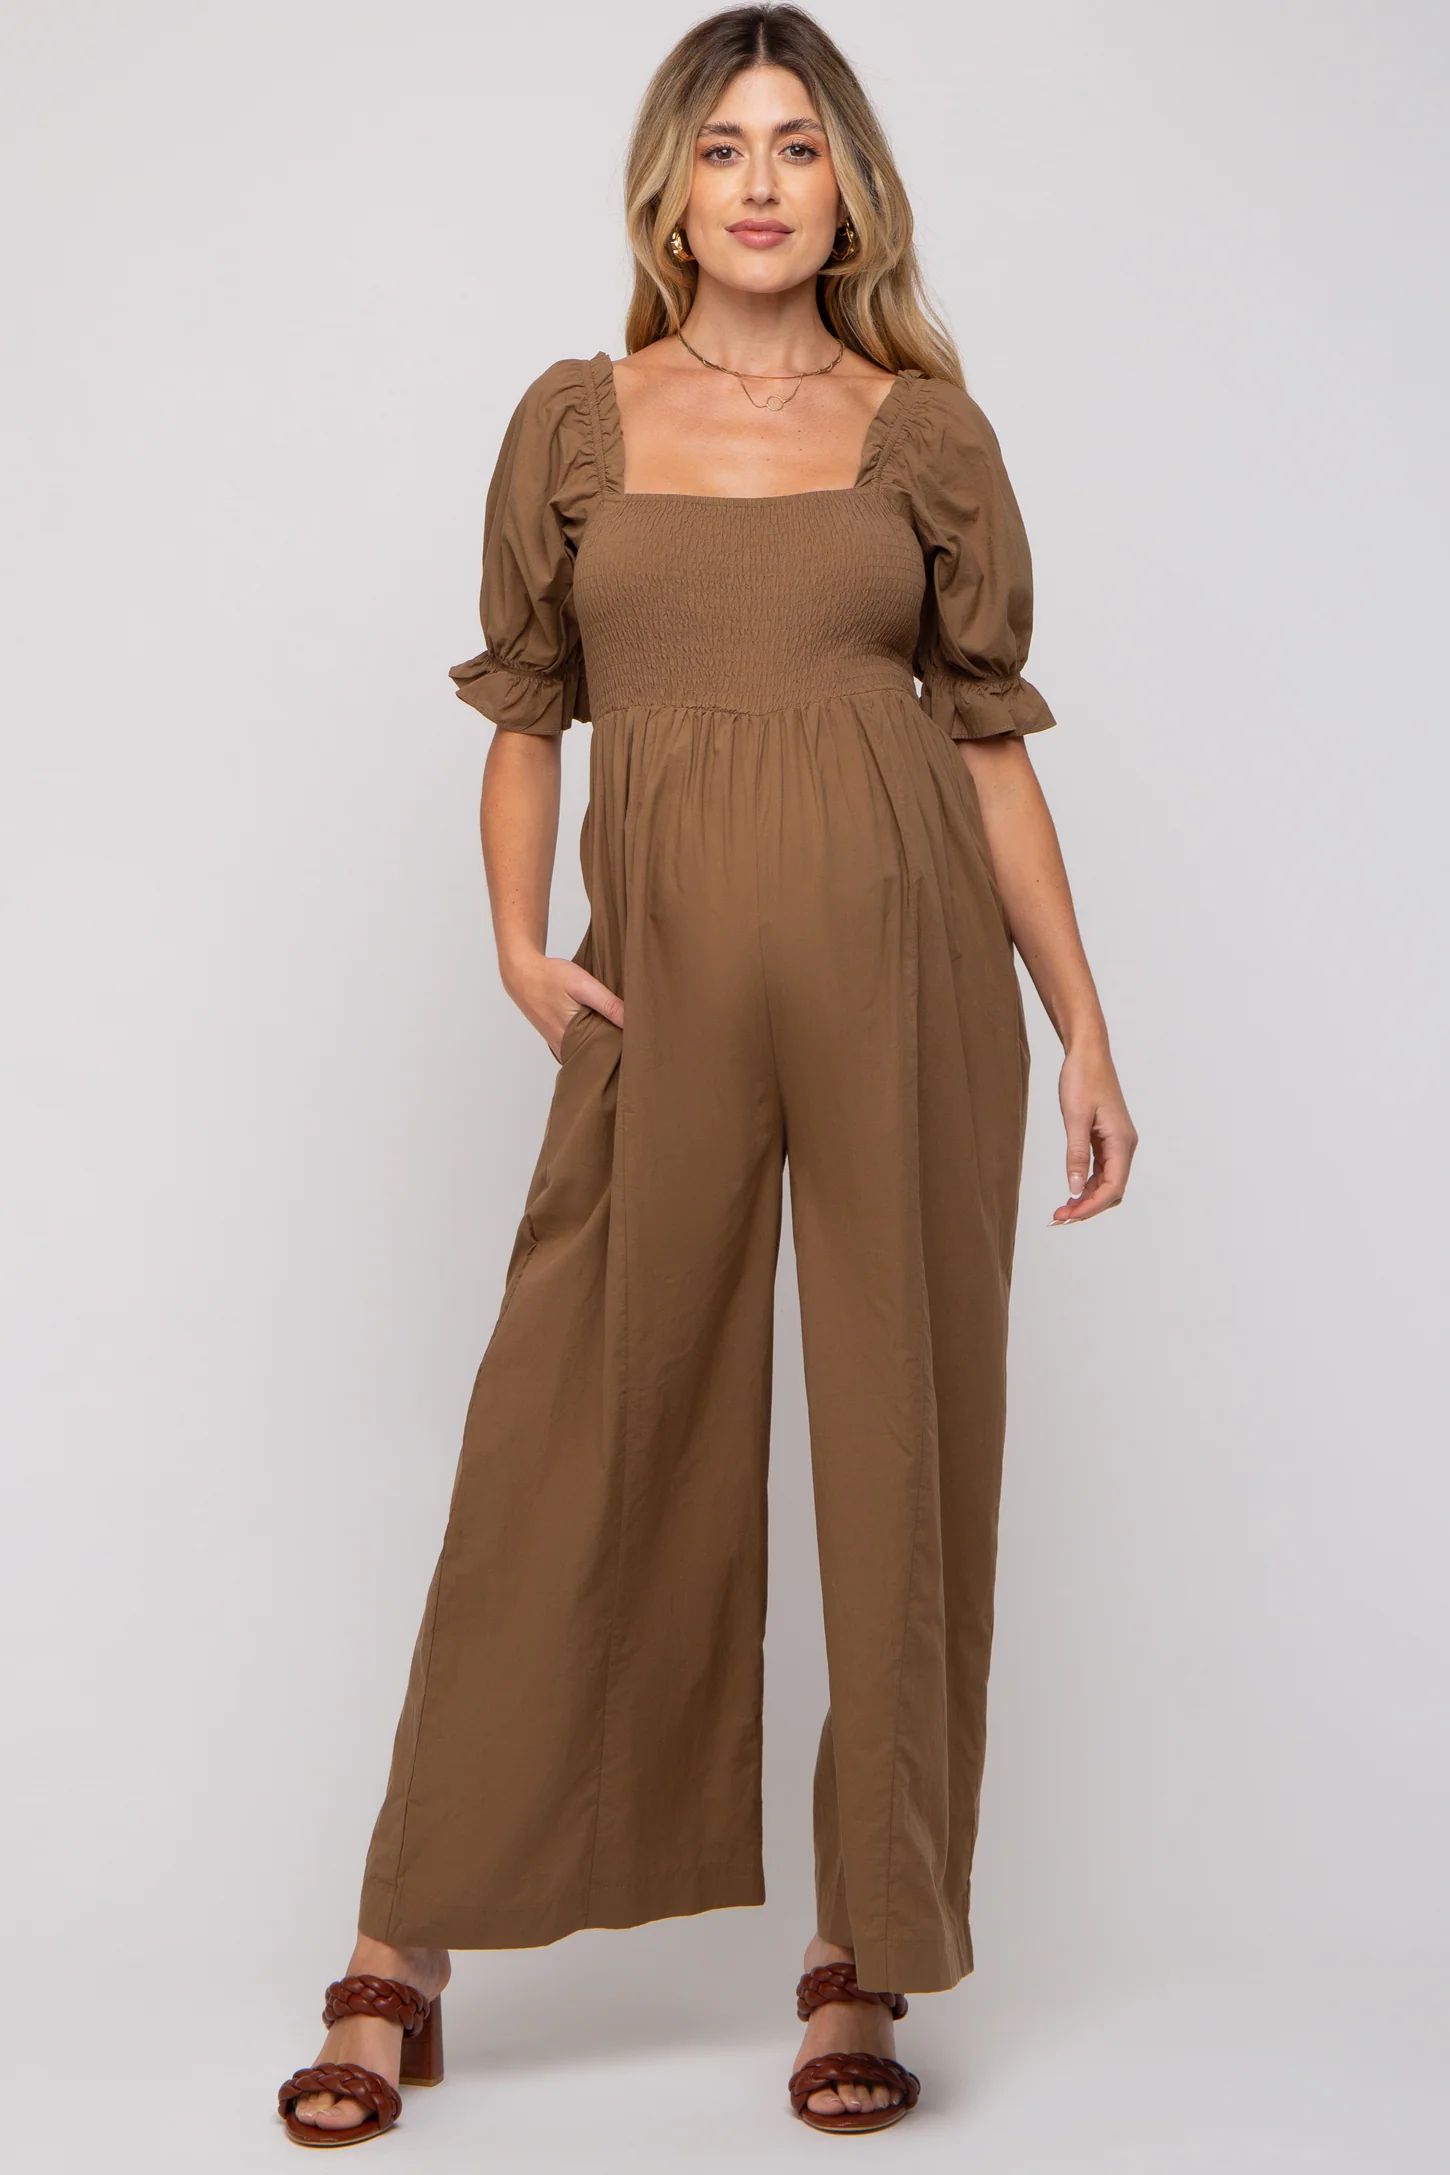 Brown Smocked Square Neck Wide Leg Maternity Jumpsuit | PinkBlush Maternity